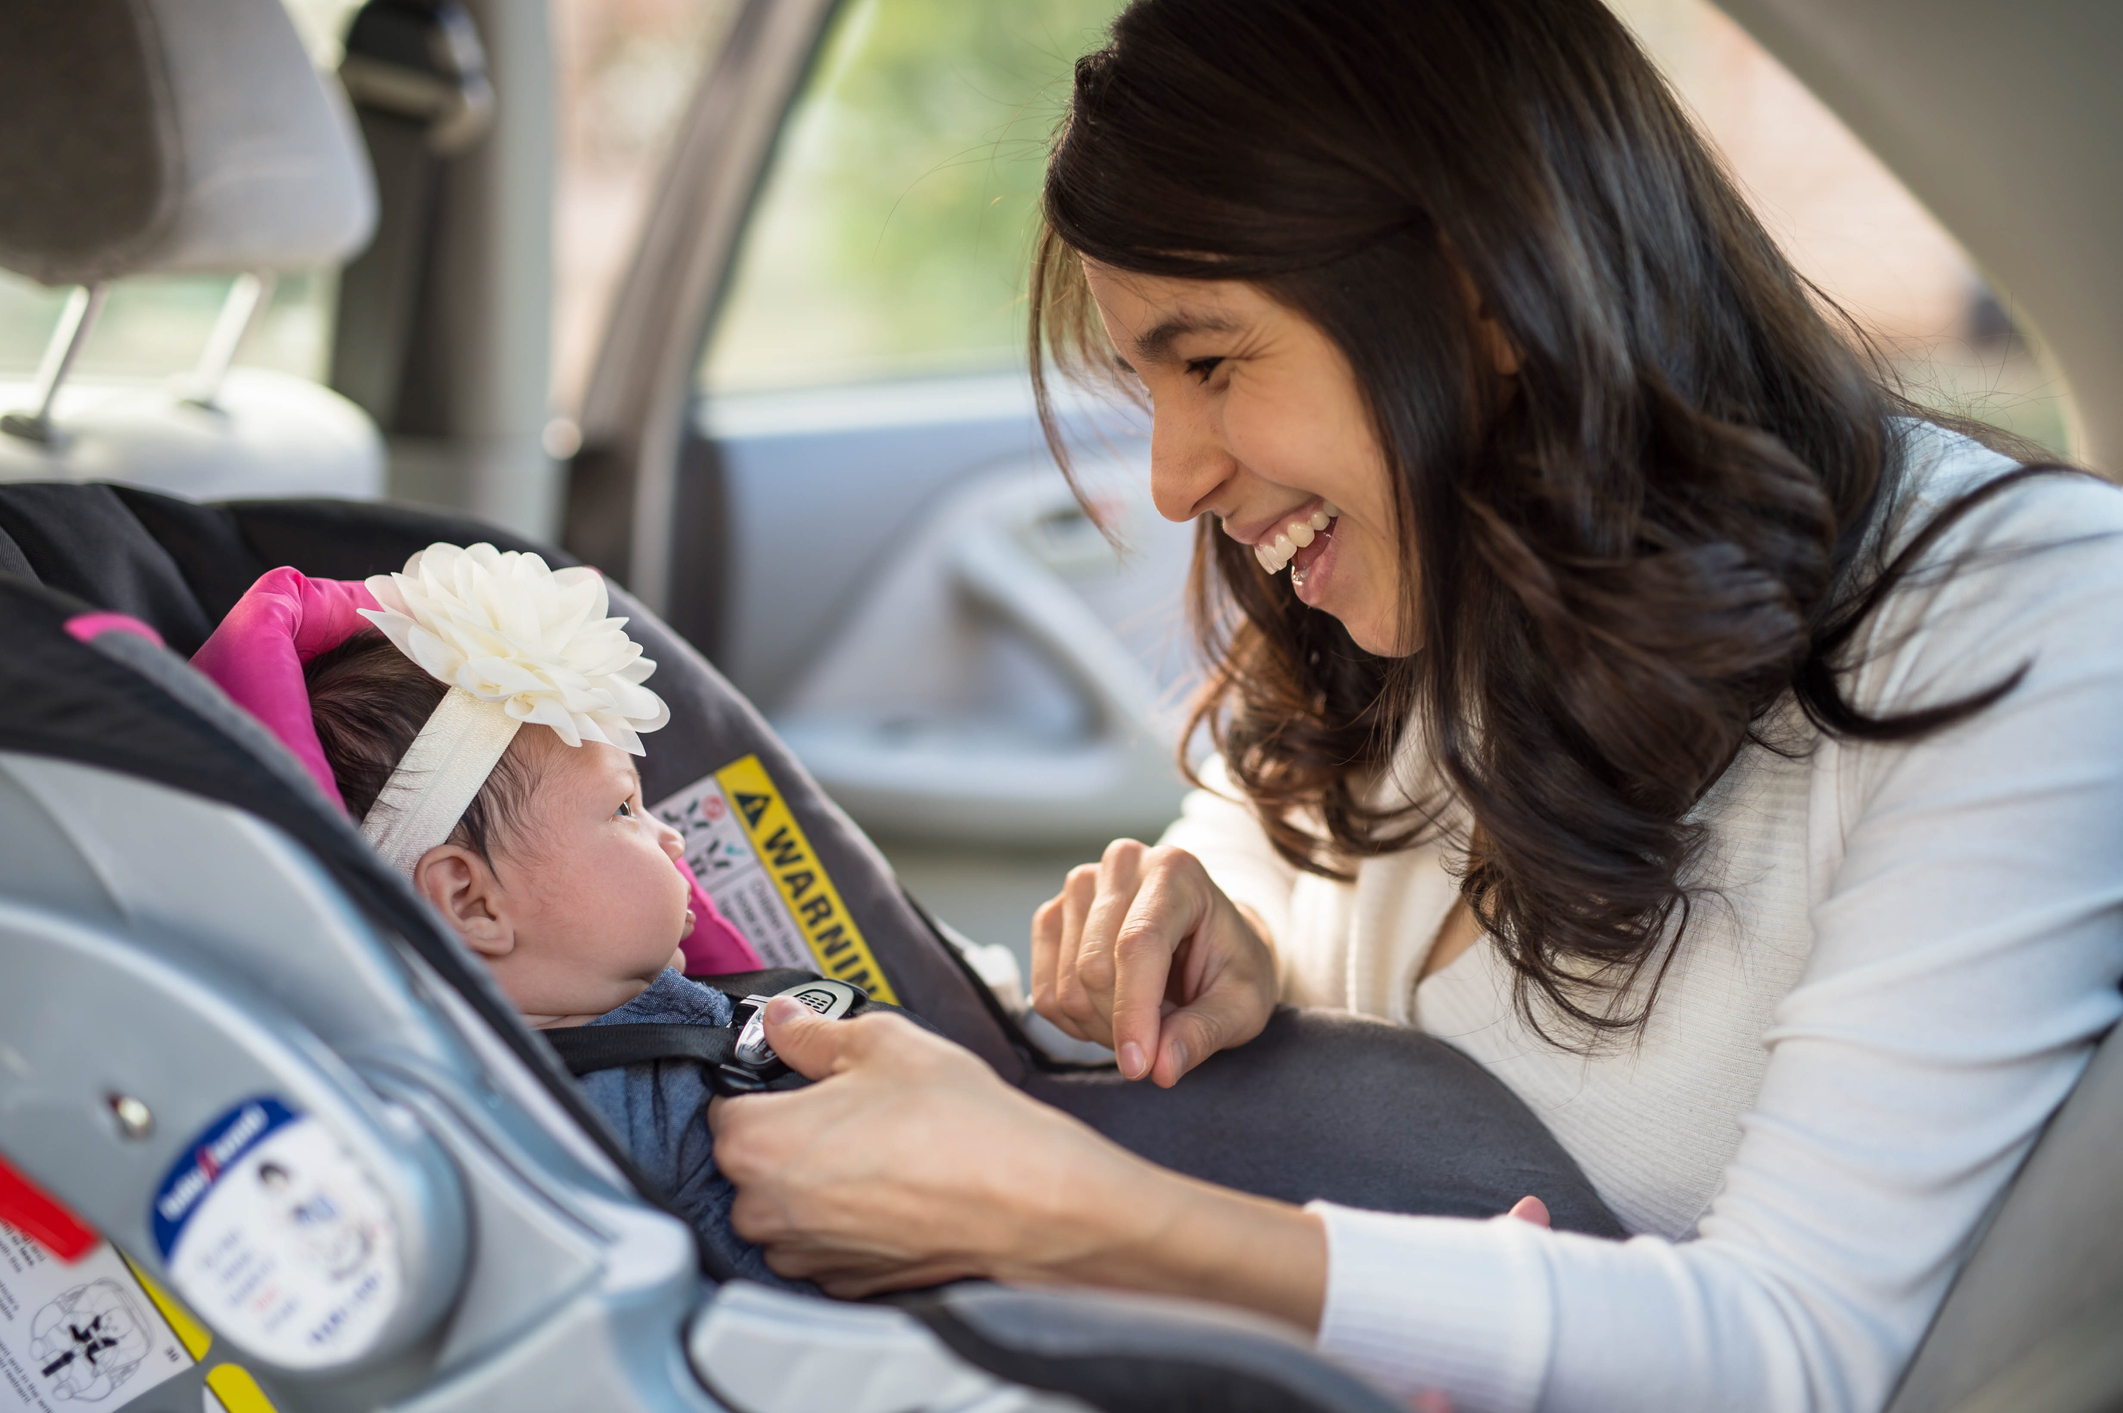 Common Car Seat Safety Mistakes